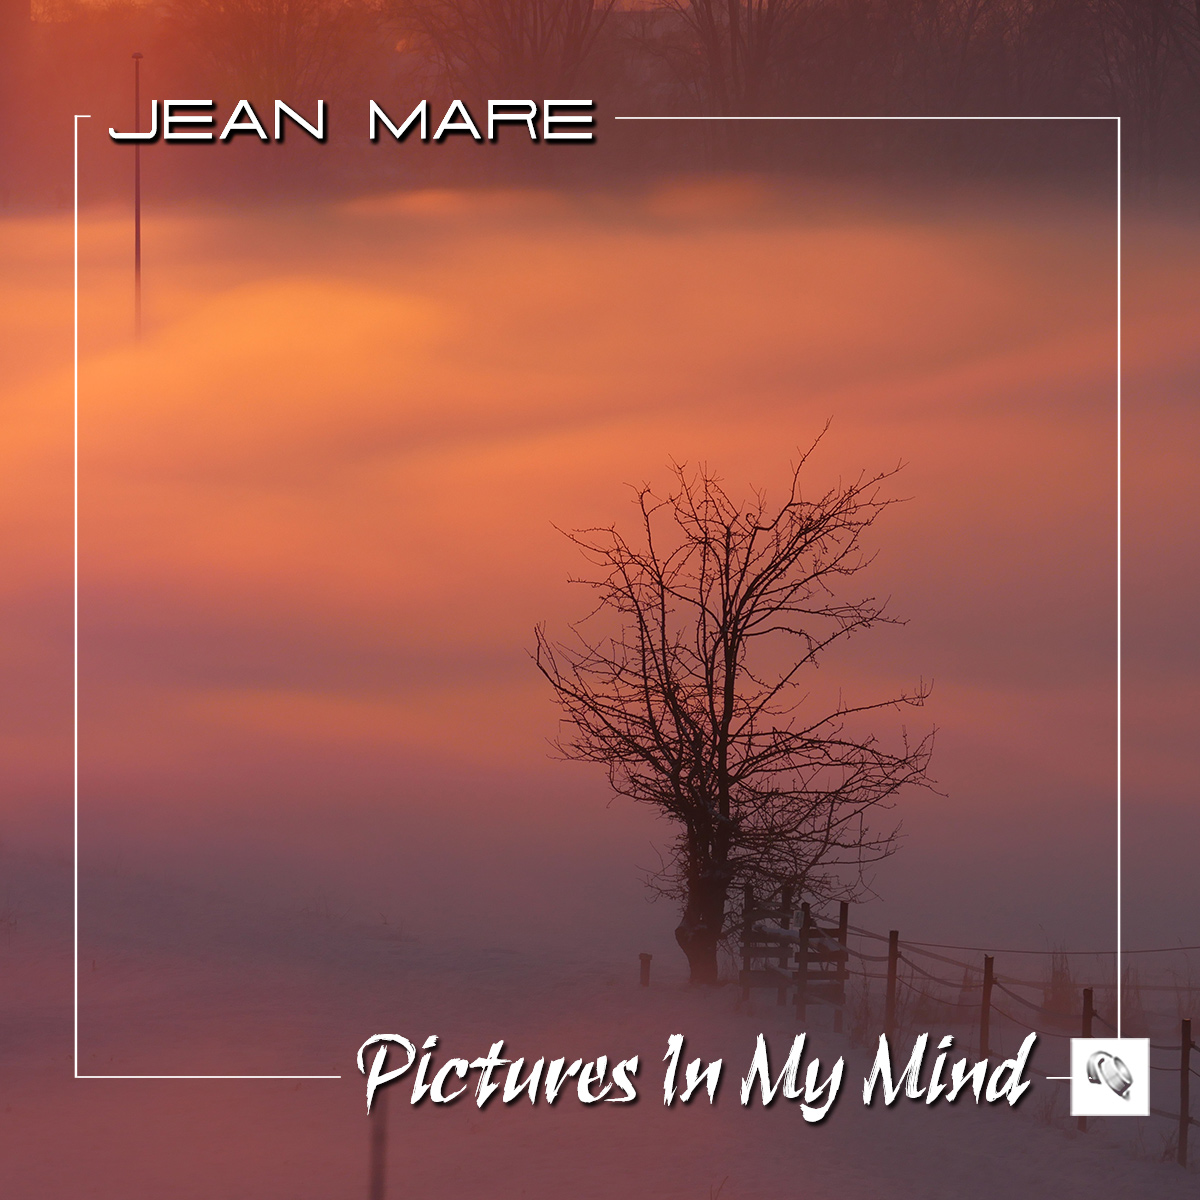 JEAN MARE-Pictures In My Mind